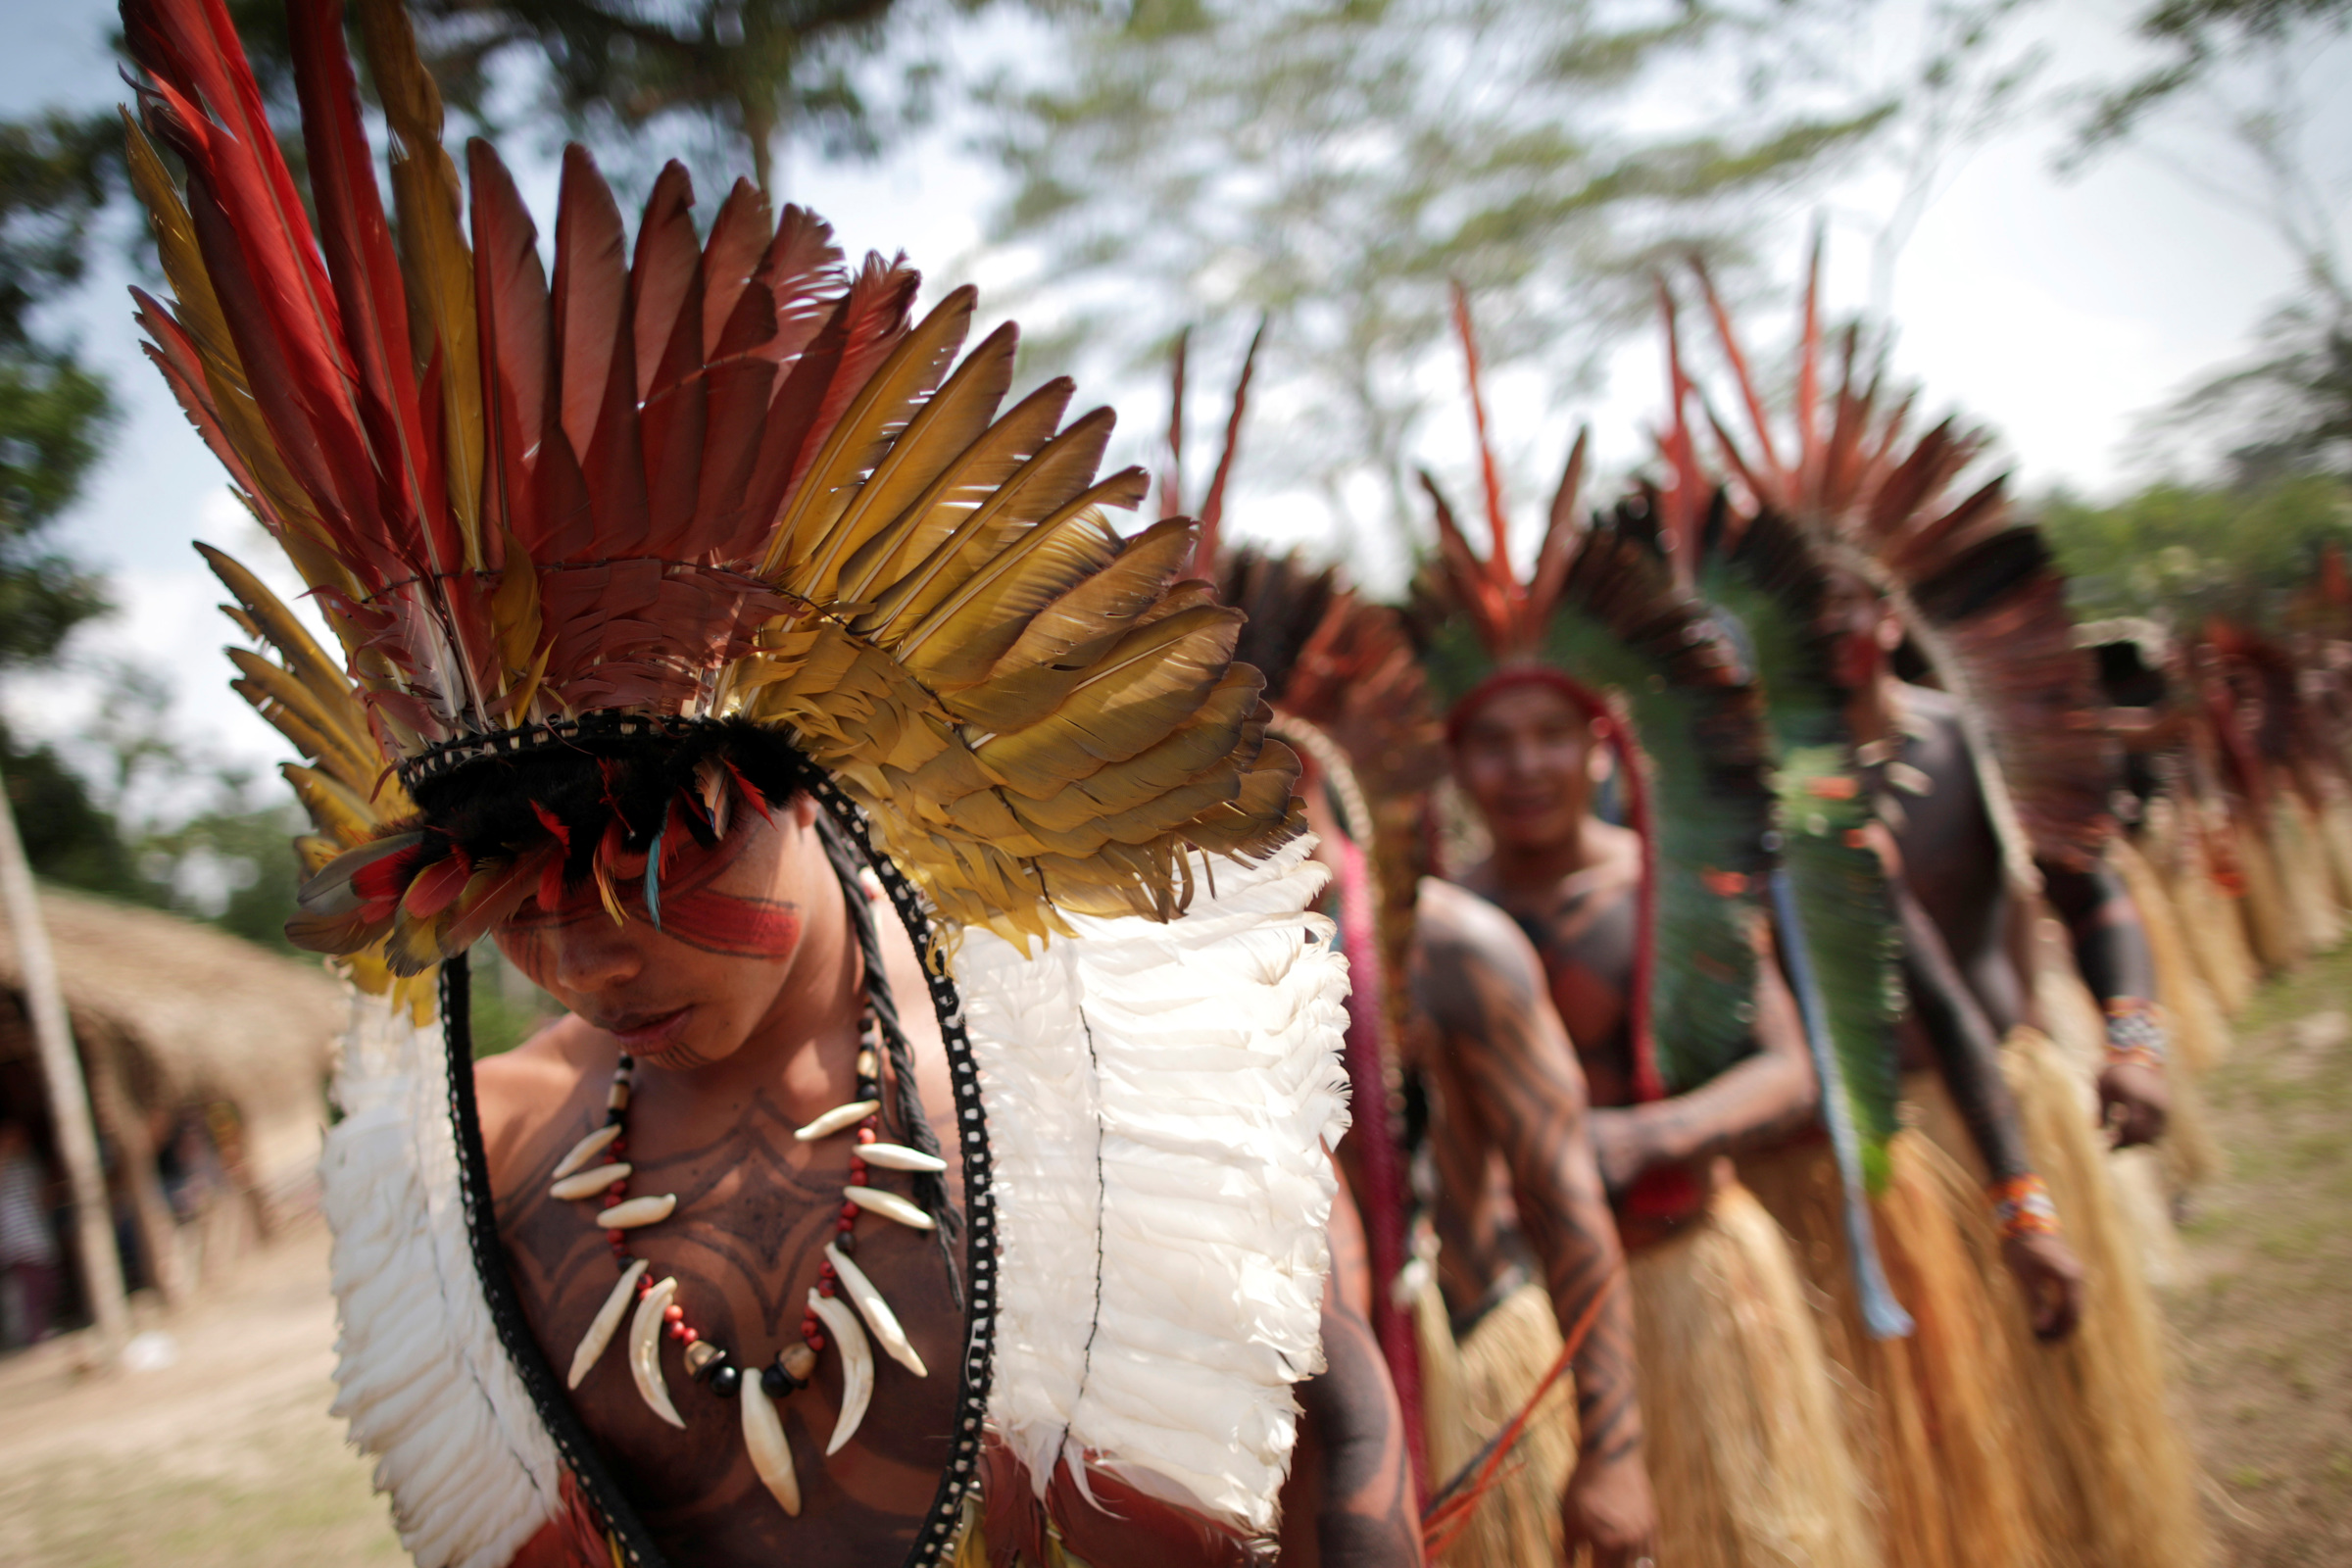 Catholics denounce attacks against Brazil's indigenous peoples in Amazon